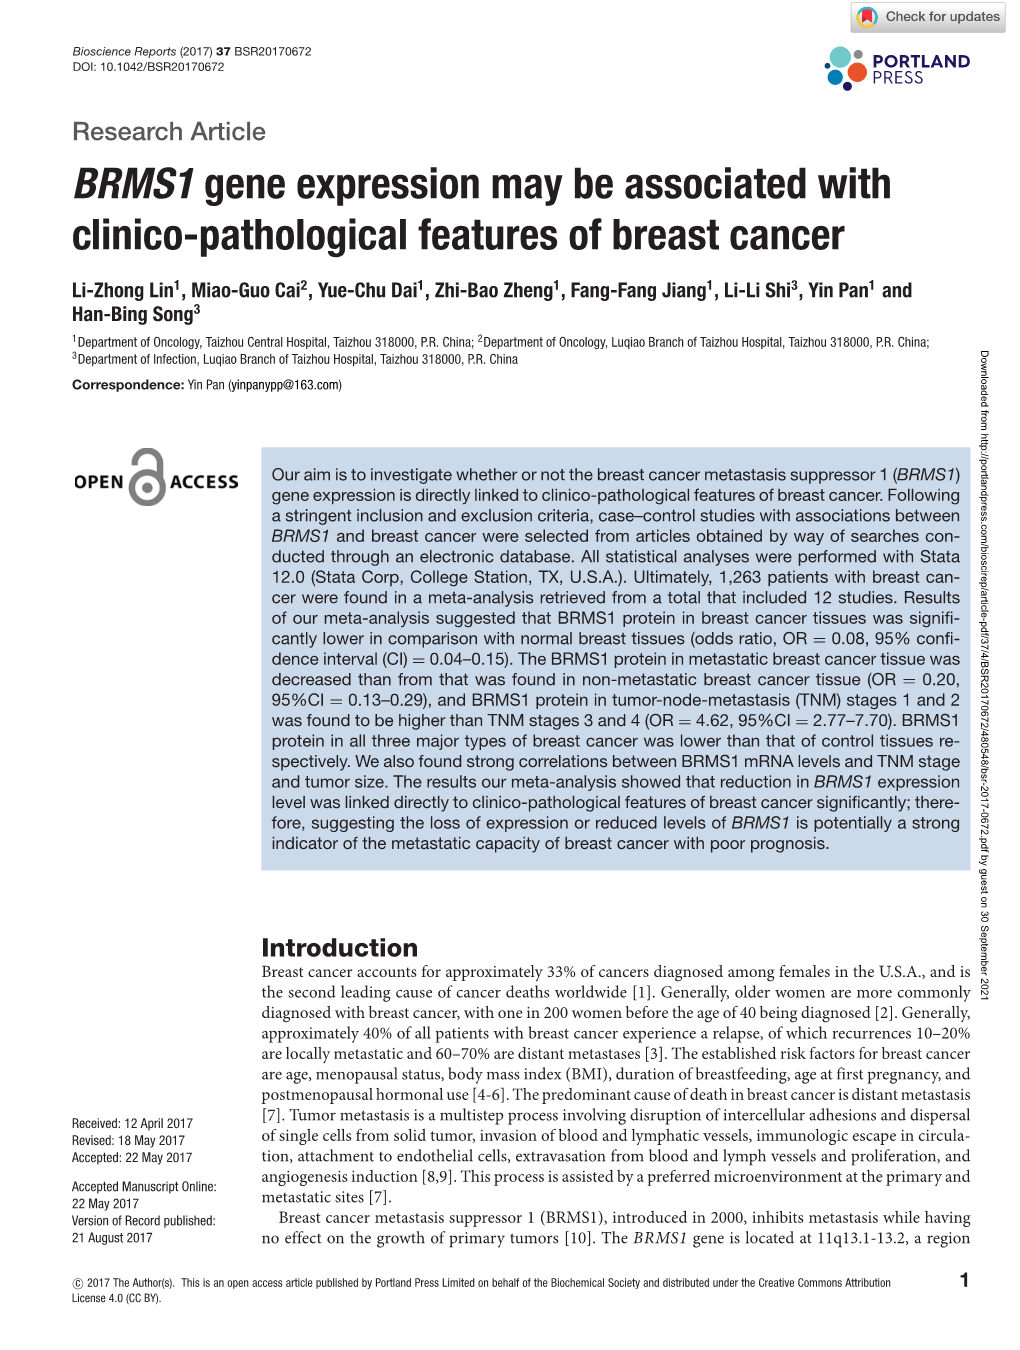 BRMS1 Gene Expression May Be Associated with Clinico-Pathological Features of Breast Cancer